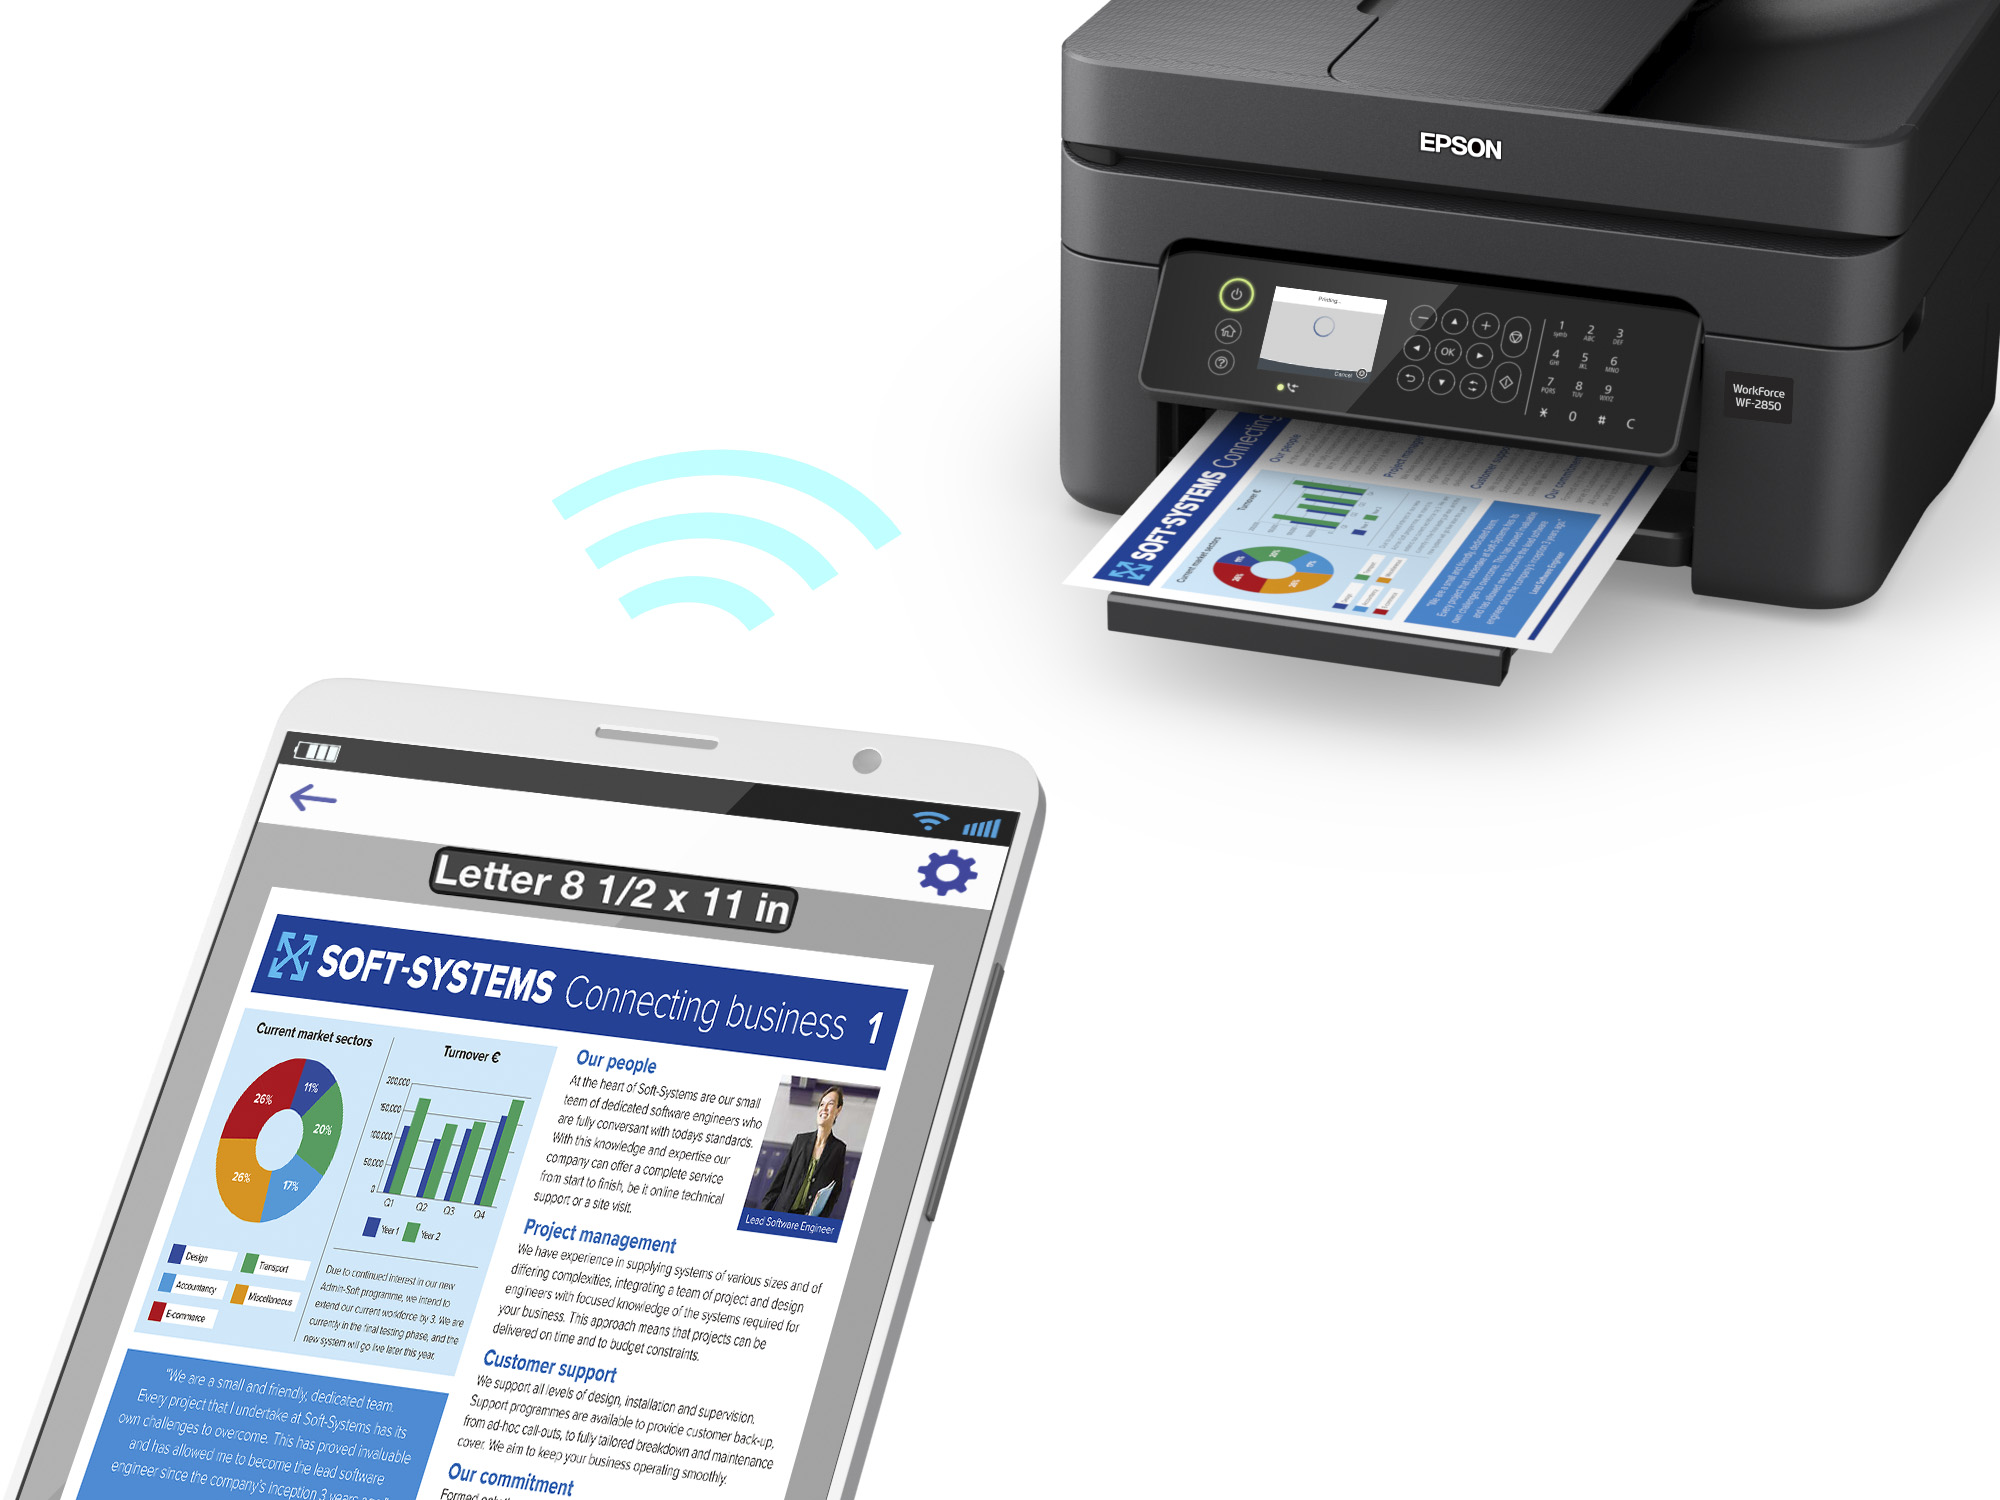 Epson WorkForce WF-2850 All-in-One Wireless Color Printer with Scanner, Copier and Fax - image 4 of 7